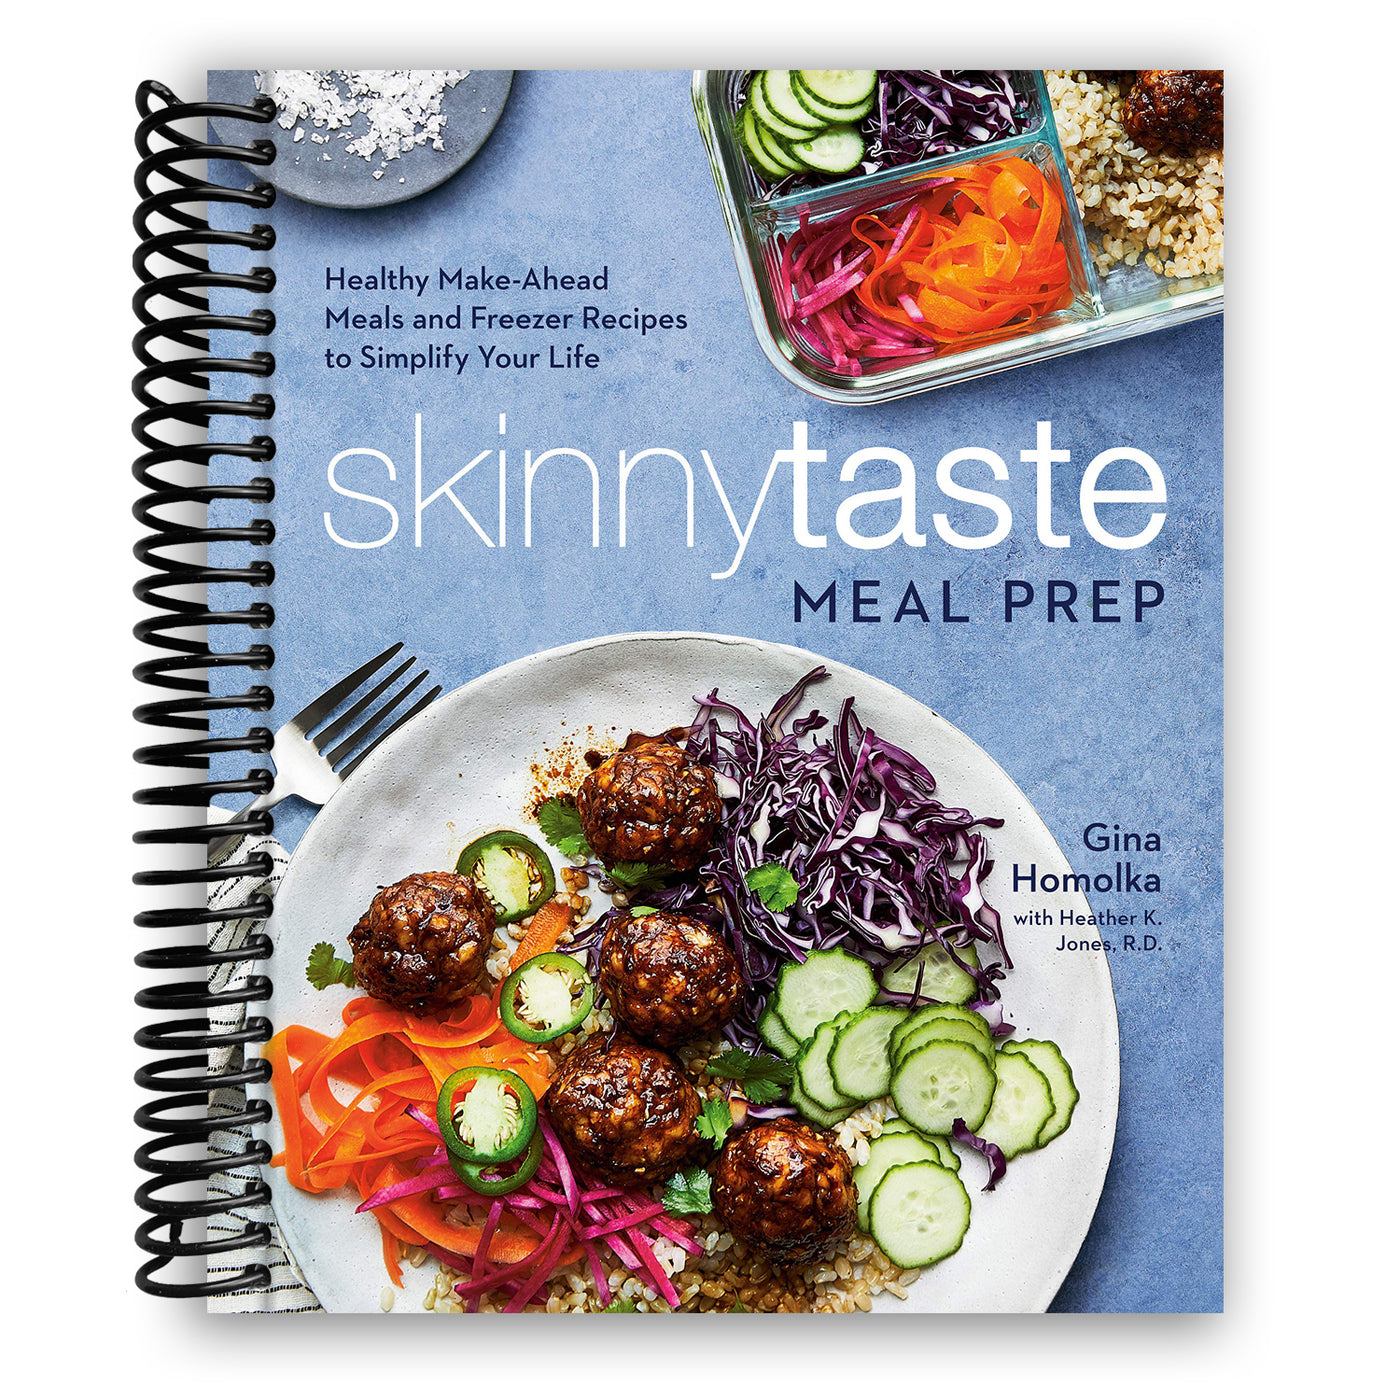 Skinnytaste Meal Prep: Healthy Make-Ahead Meals and Freezer Recipes to Simplify Your Life: A Cookbook (Spiral Bound)